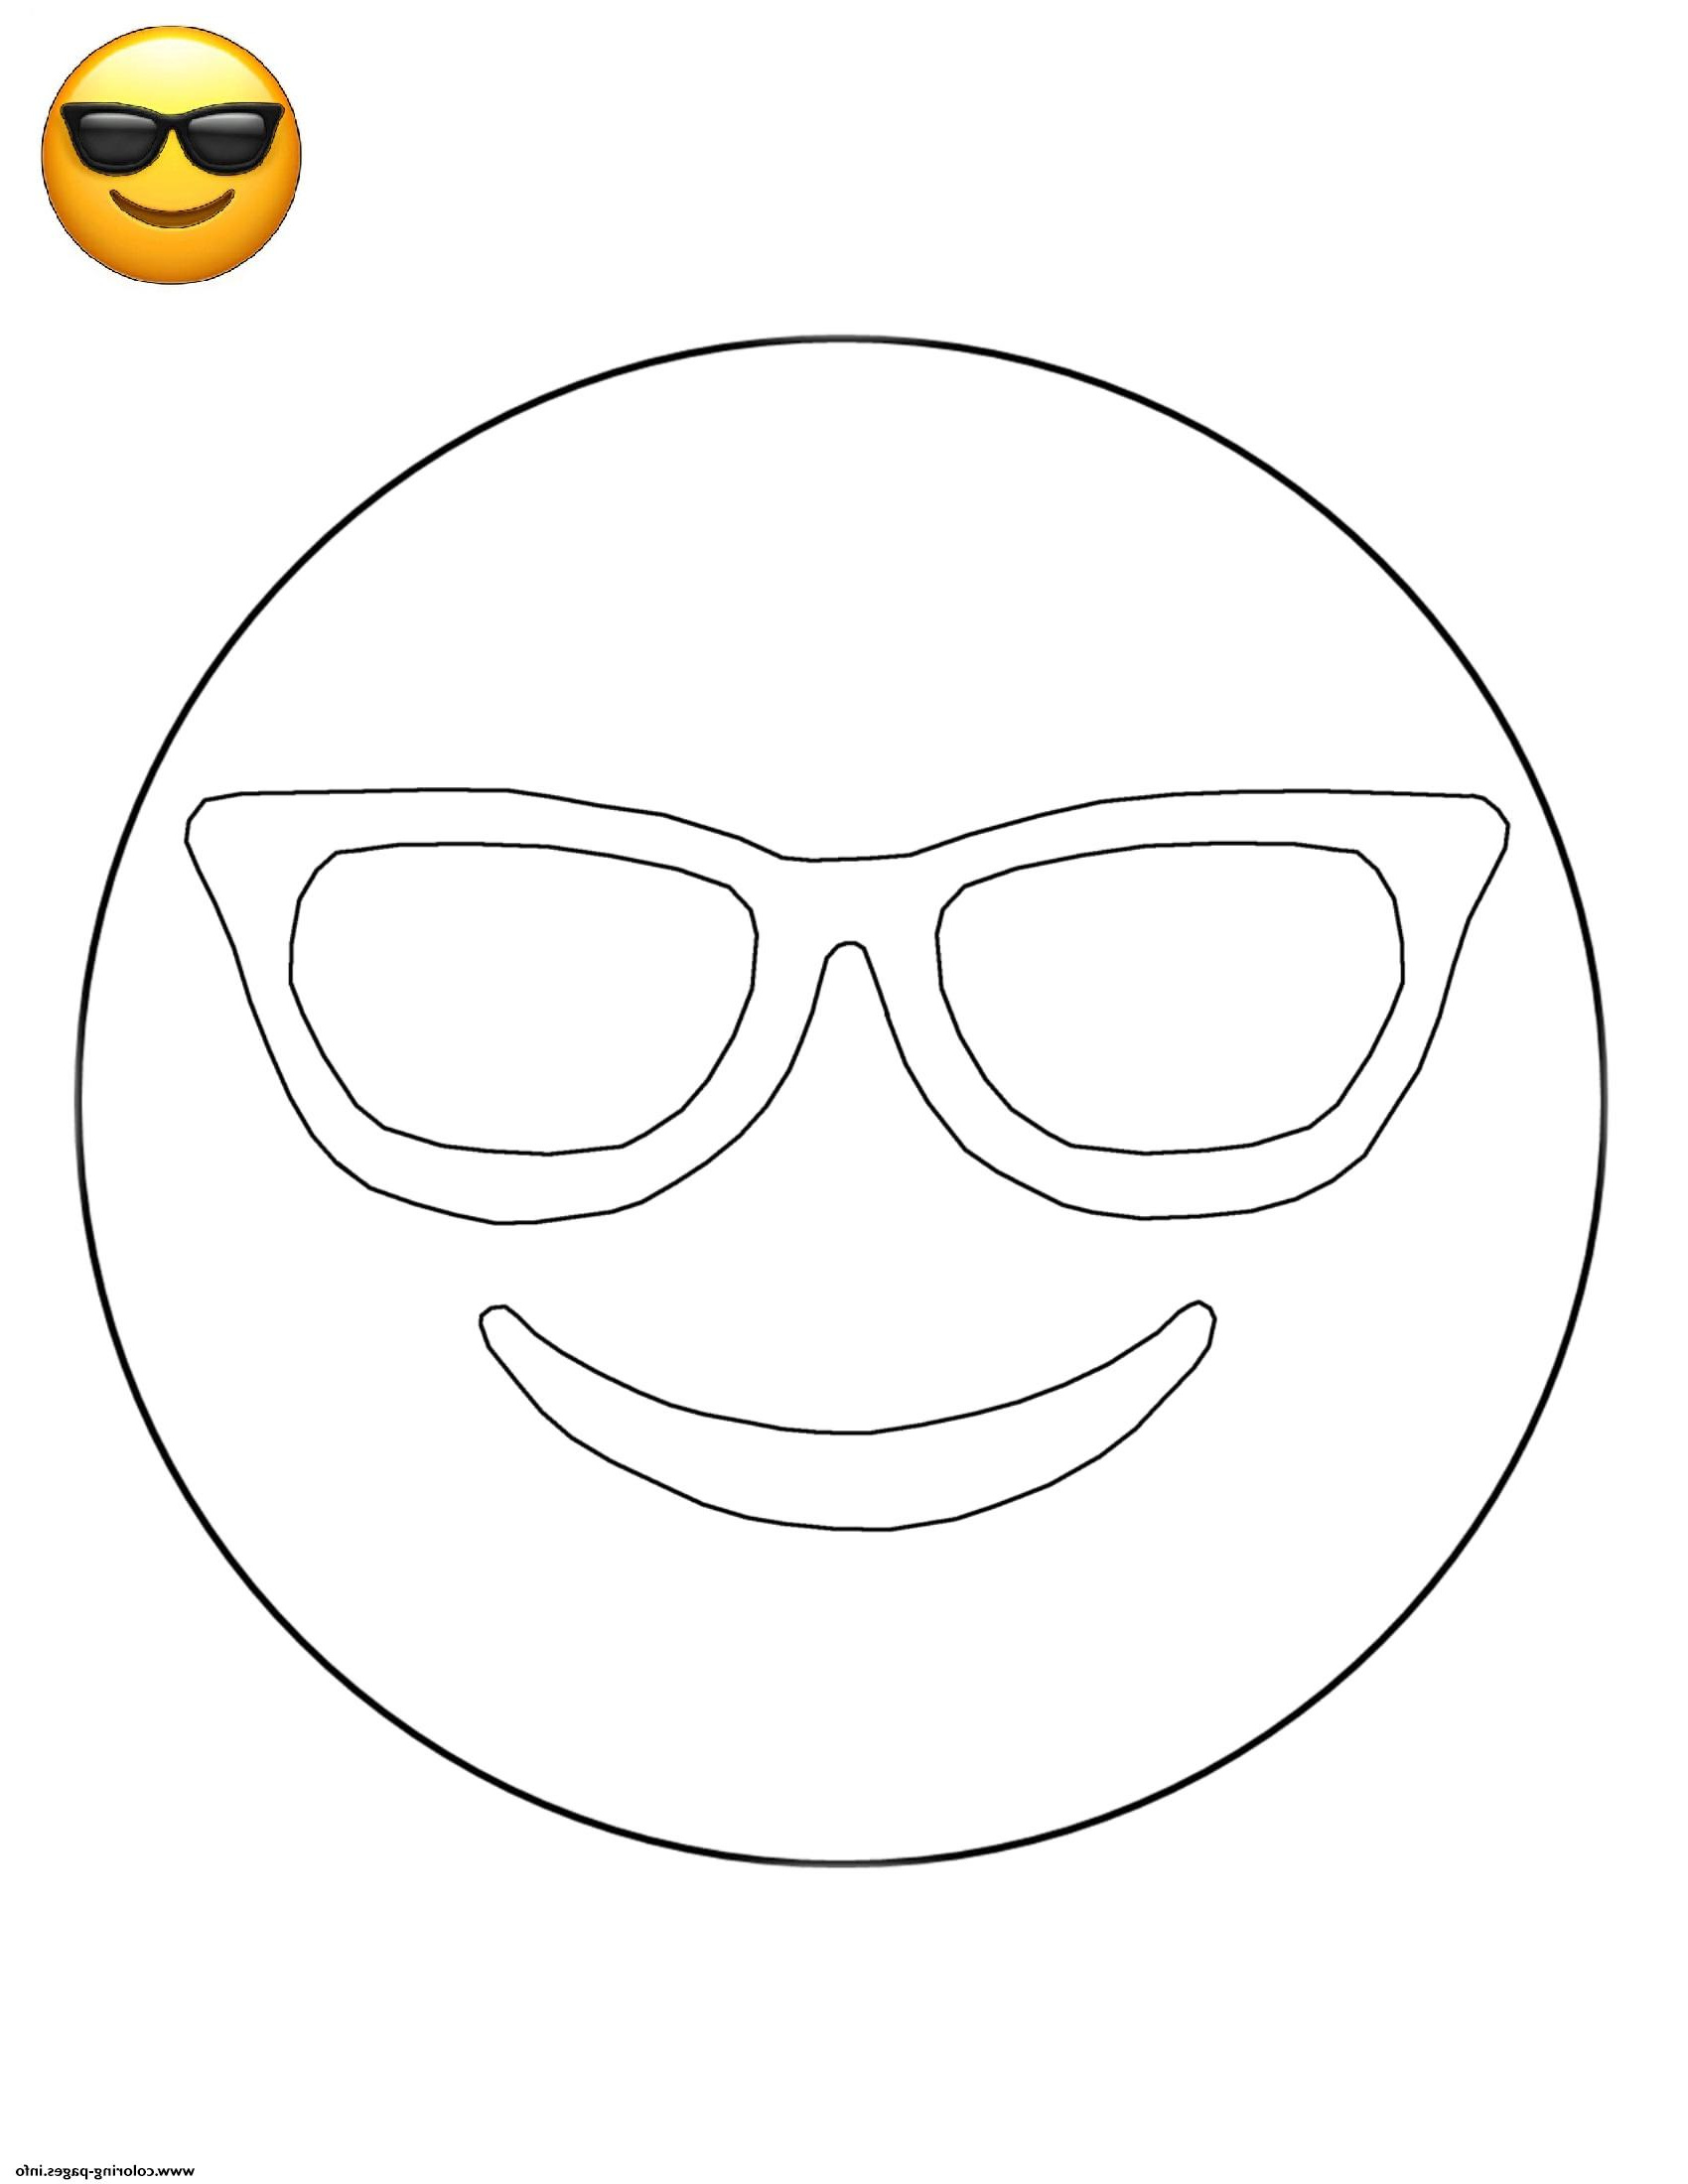 Emoji A Colorier Inspirant Galerie Emoji Sunglasses Free Sheets Coloring Pages Printable